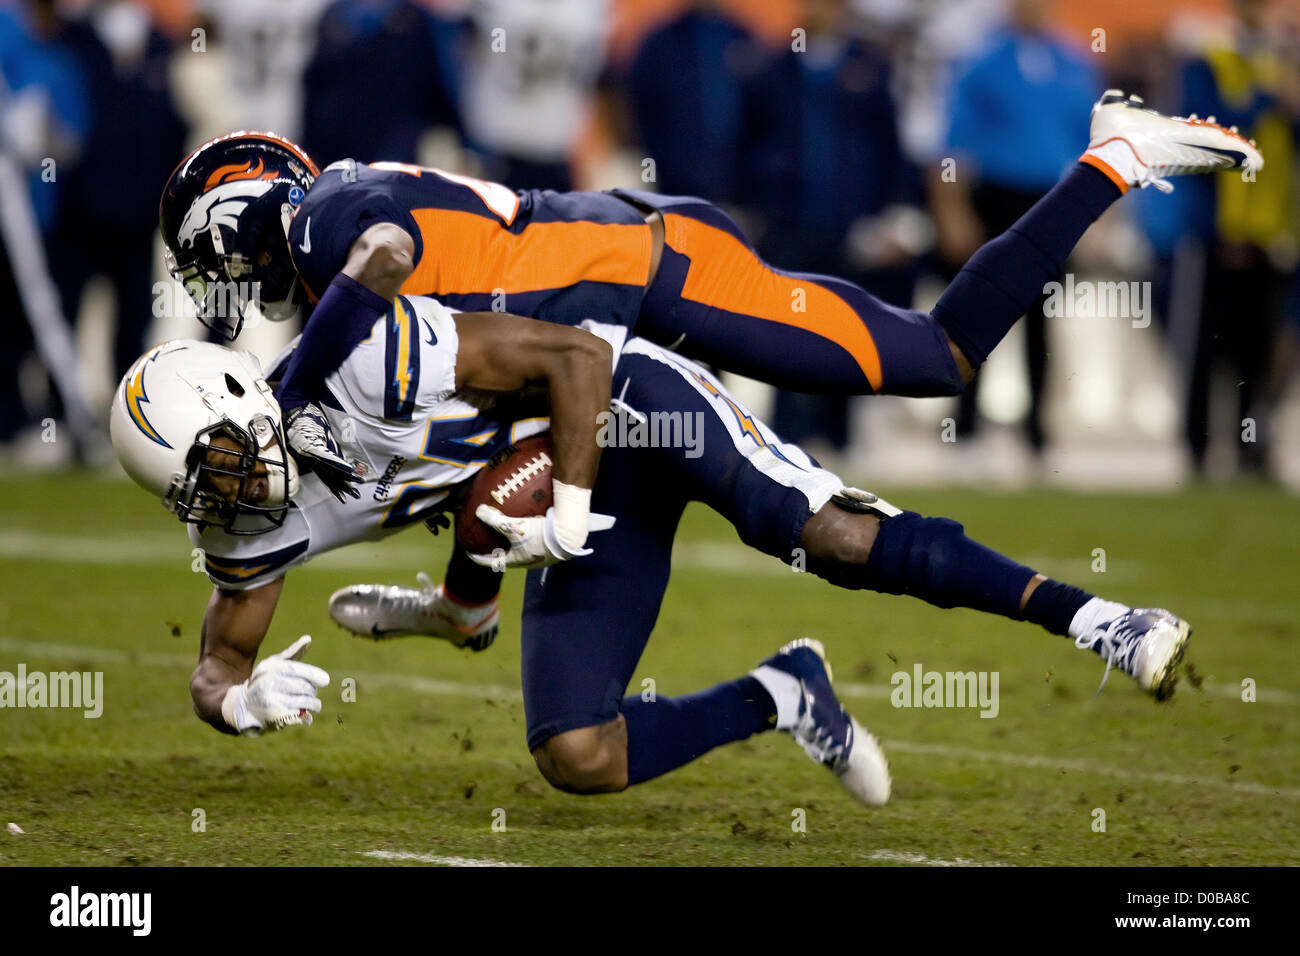 Nov. 18, 2012 - Denver, Colorado, U.S. - Chargers WR DANARIO ALEXANDER, bottom, grabs a pass against Broncos CB CHAMP BAILEY, top during the 4th quarter at Sports Authority Field at Mile High Sunday afternoon. Broncos beat the Chargers 30-23. (Credit Image: © Hector Acevedo/ZUMAPRESS.com) Stock Photo